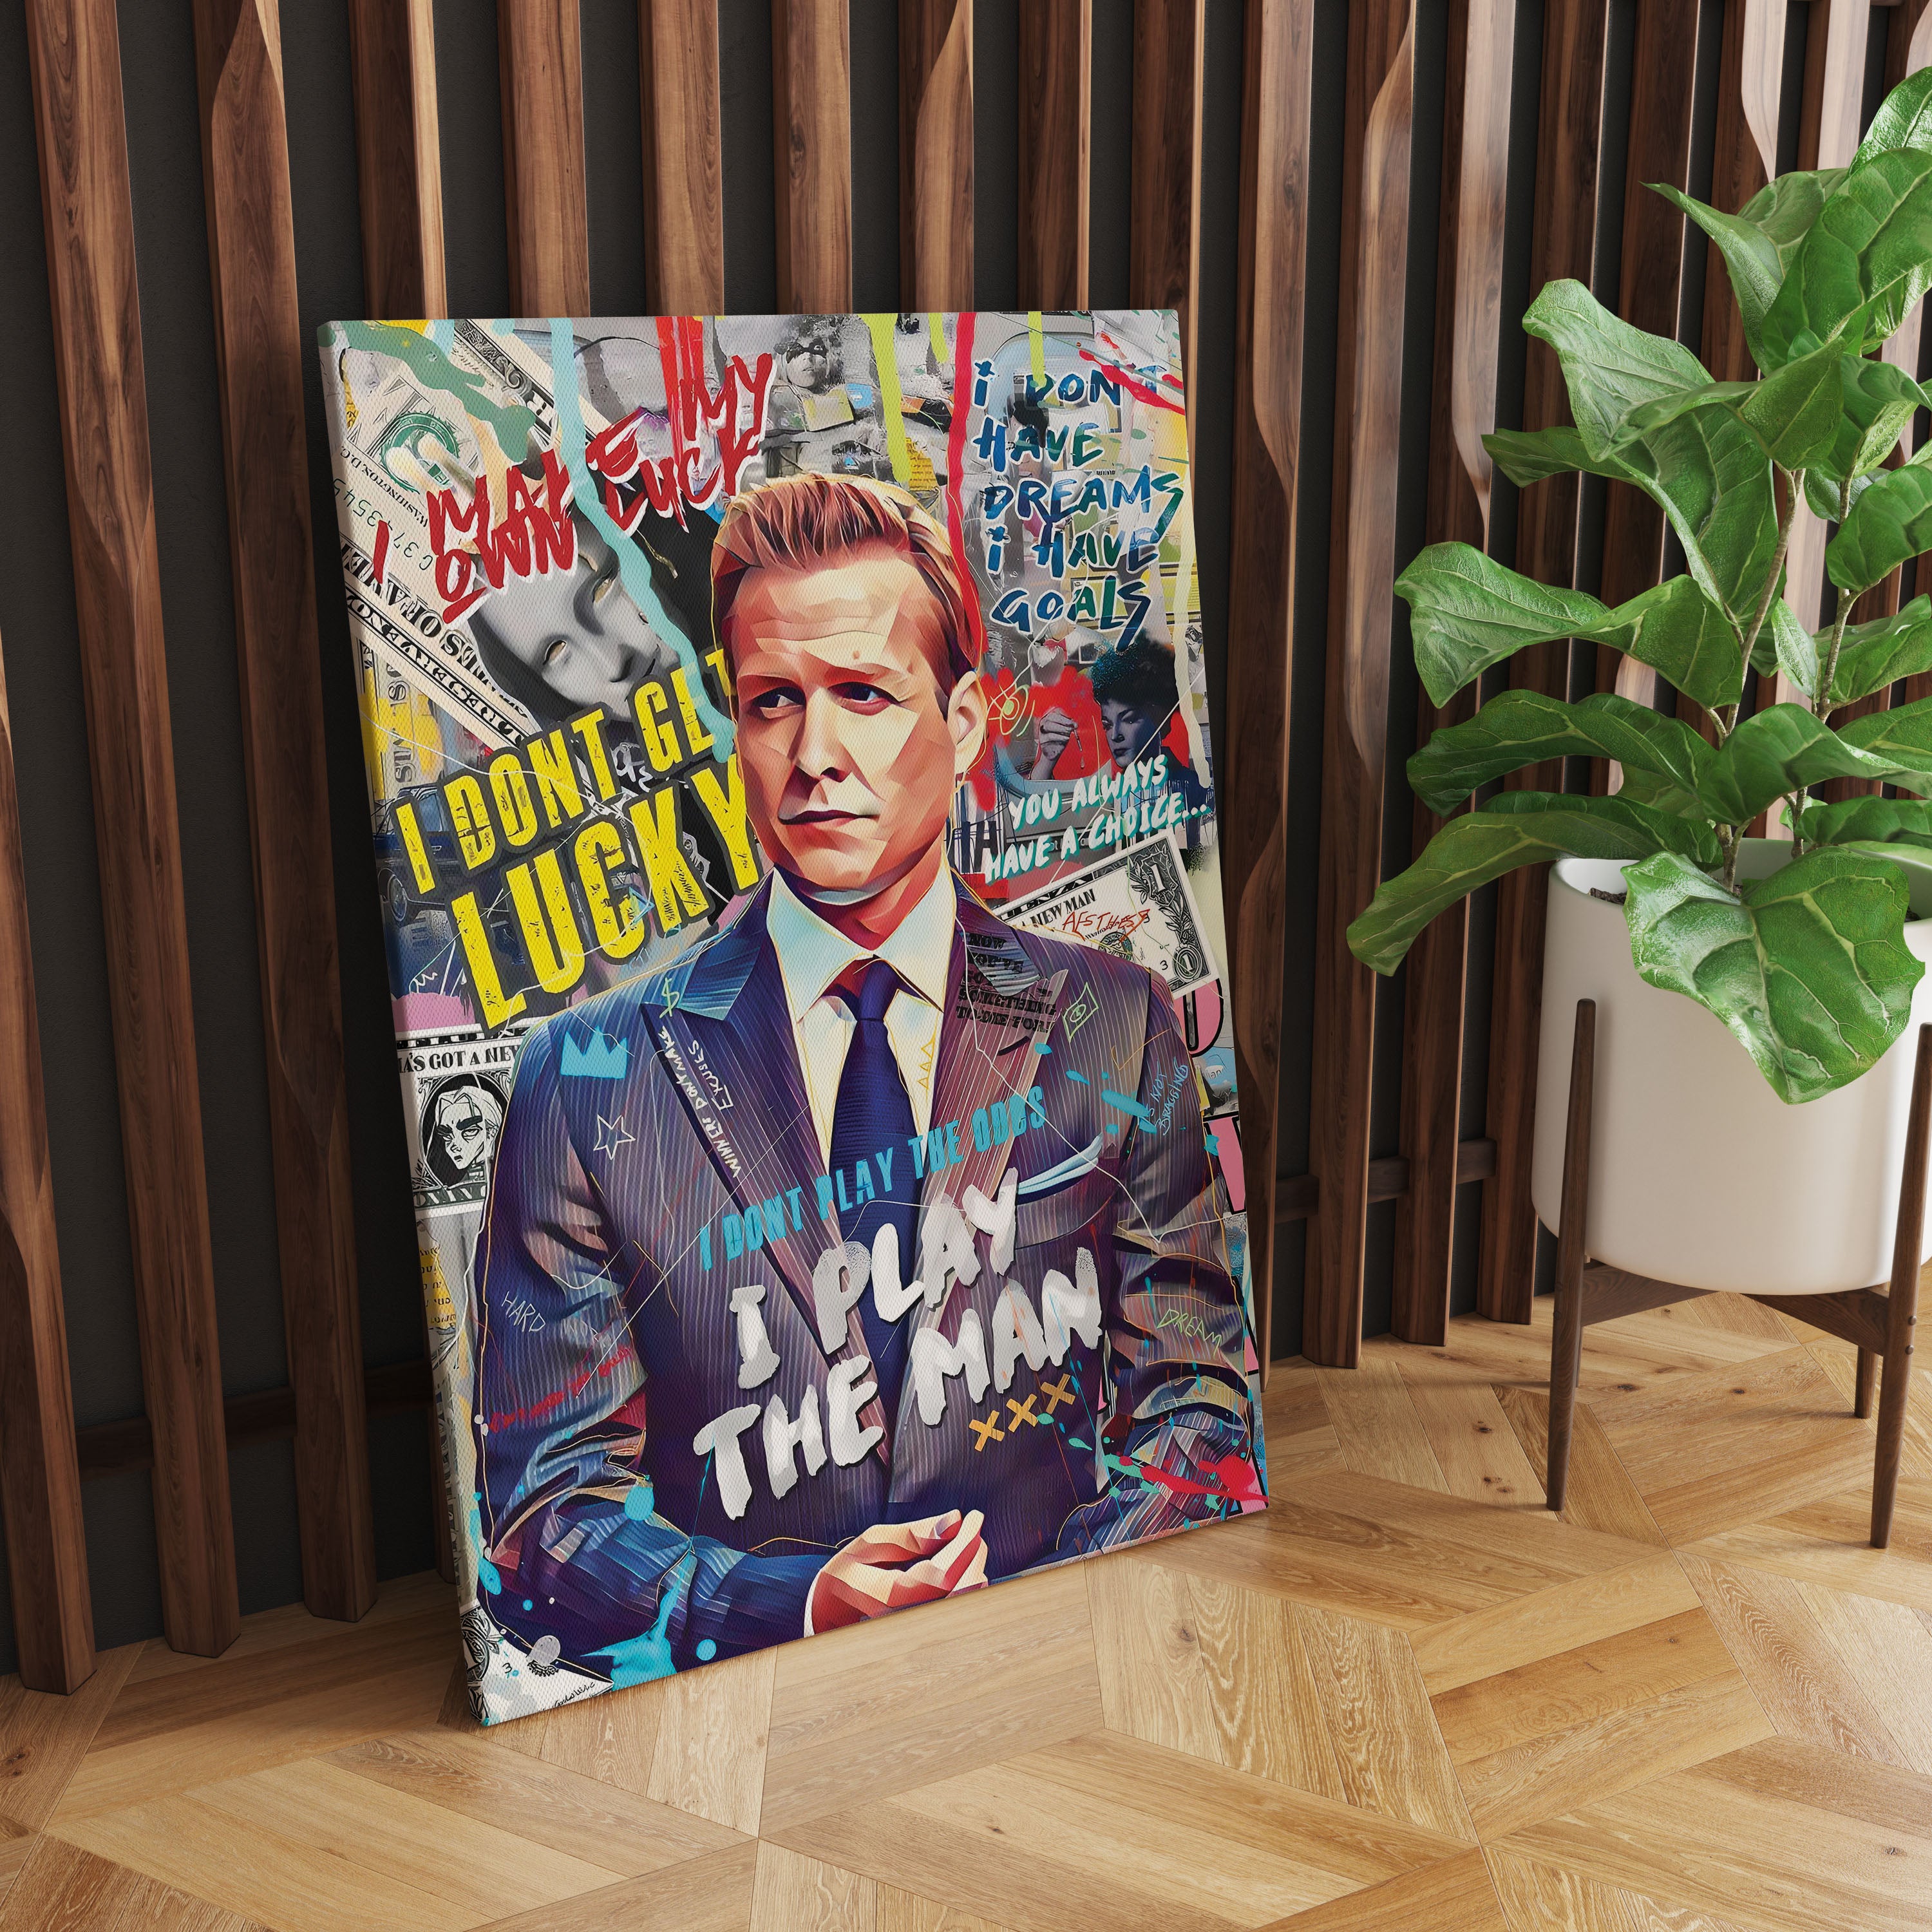 Play the Man Harvey Specter Canvas Wall Painting